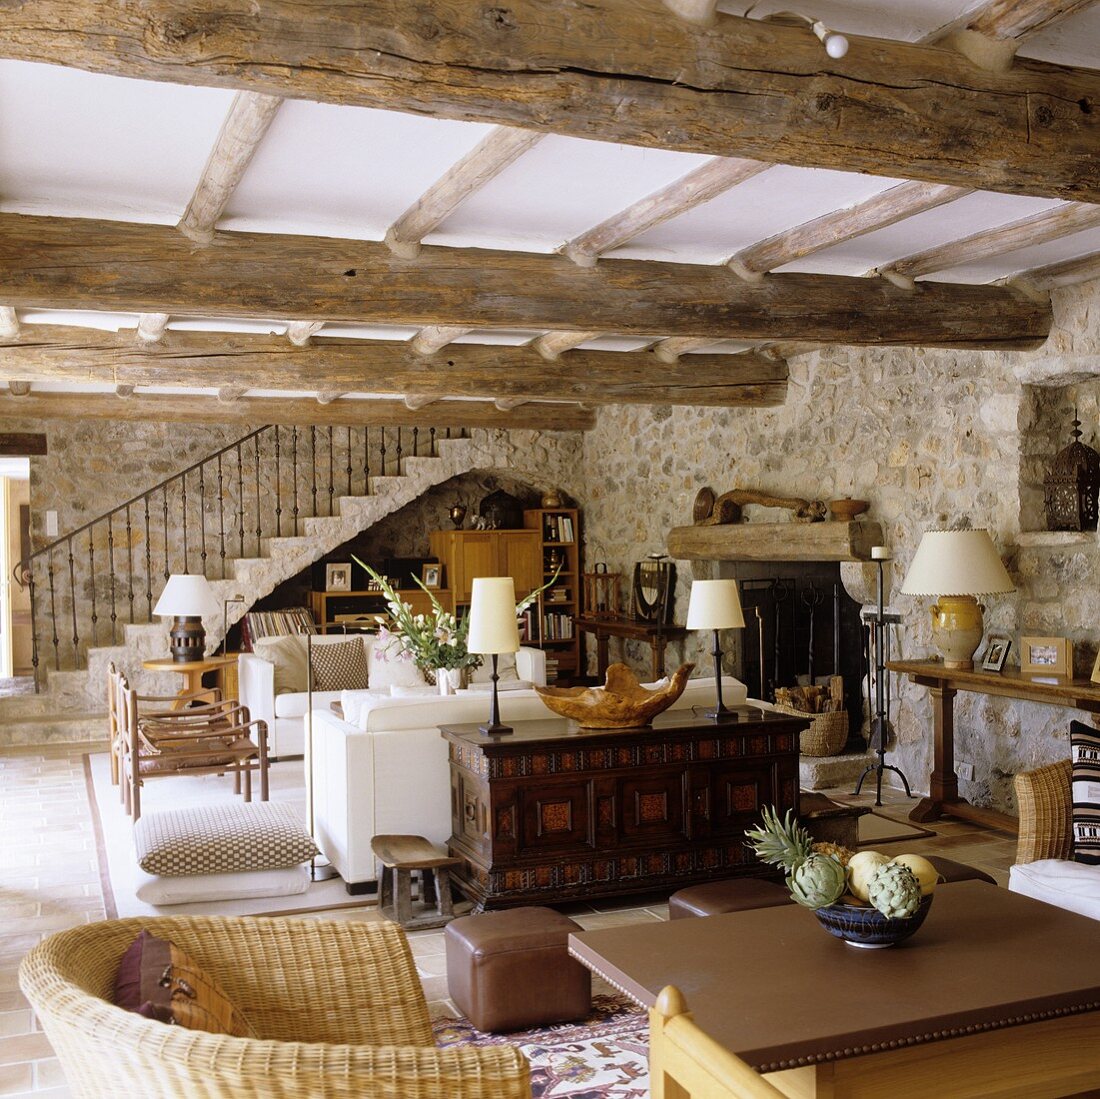 An open living room with a natural stone wall and a dining area under a rustic wooden beamed ceiling and view of a flight of stairs